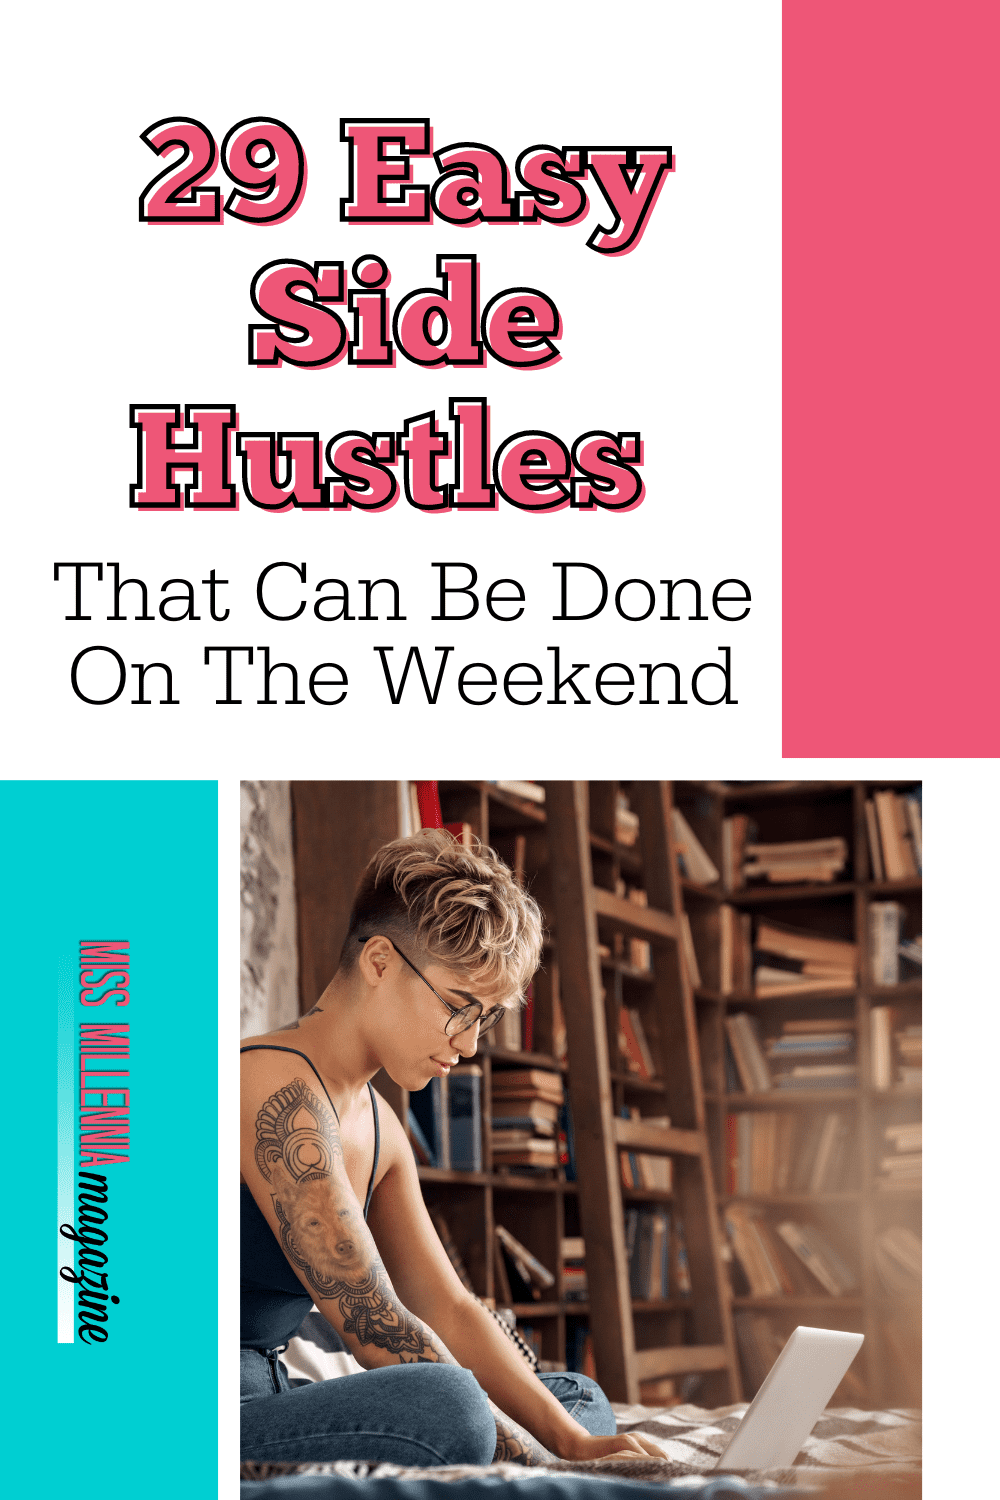 29 Easy Side Hustles That Can Be Done On The Weekend